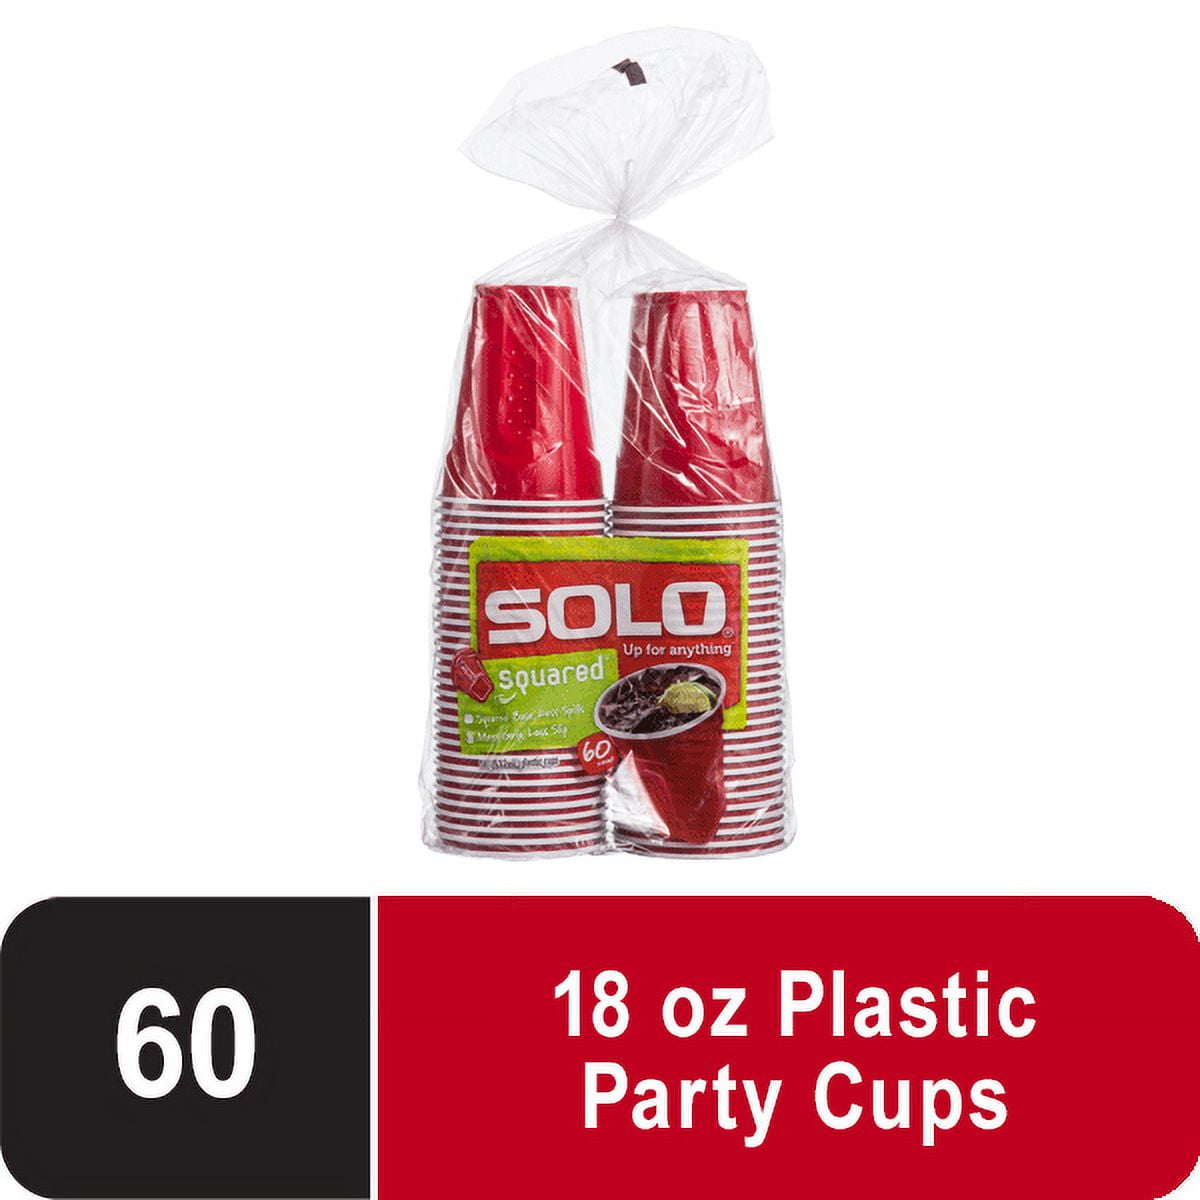 The red solo cup is the best receptacle